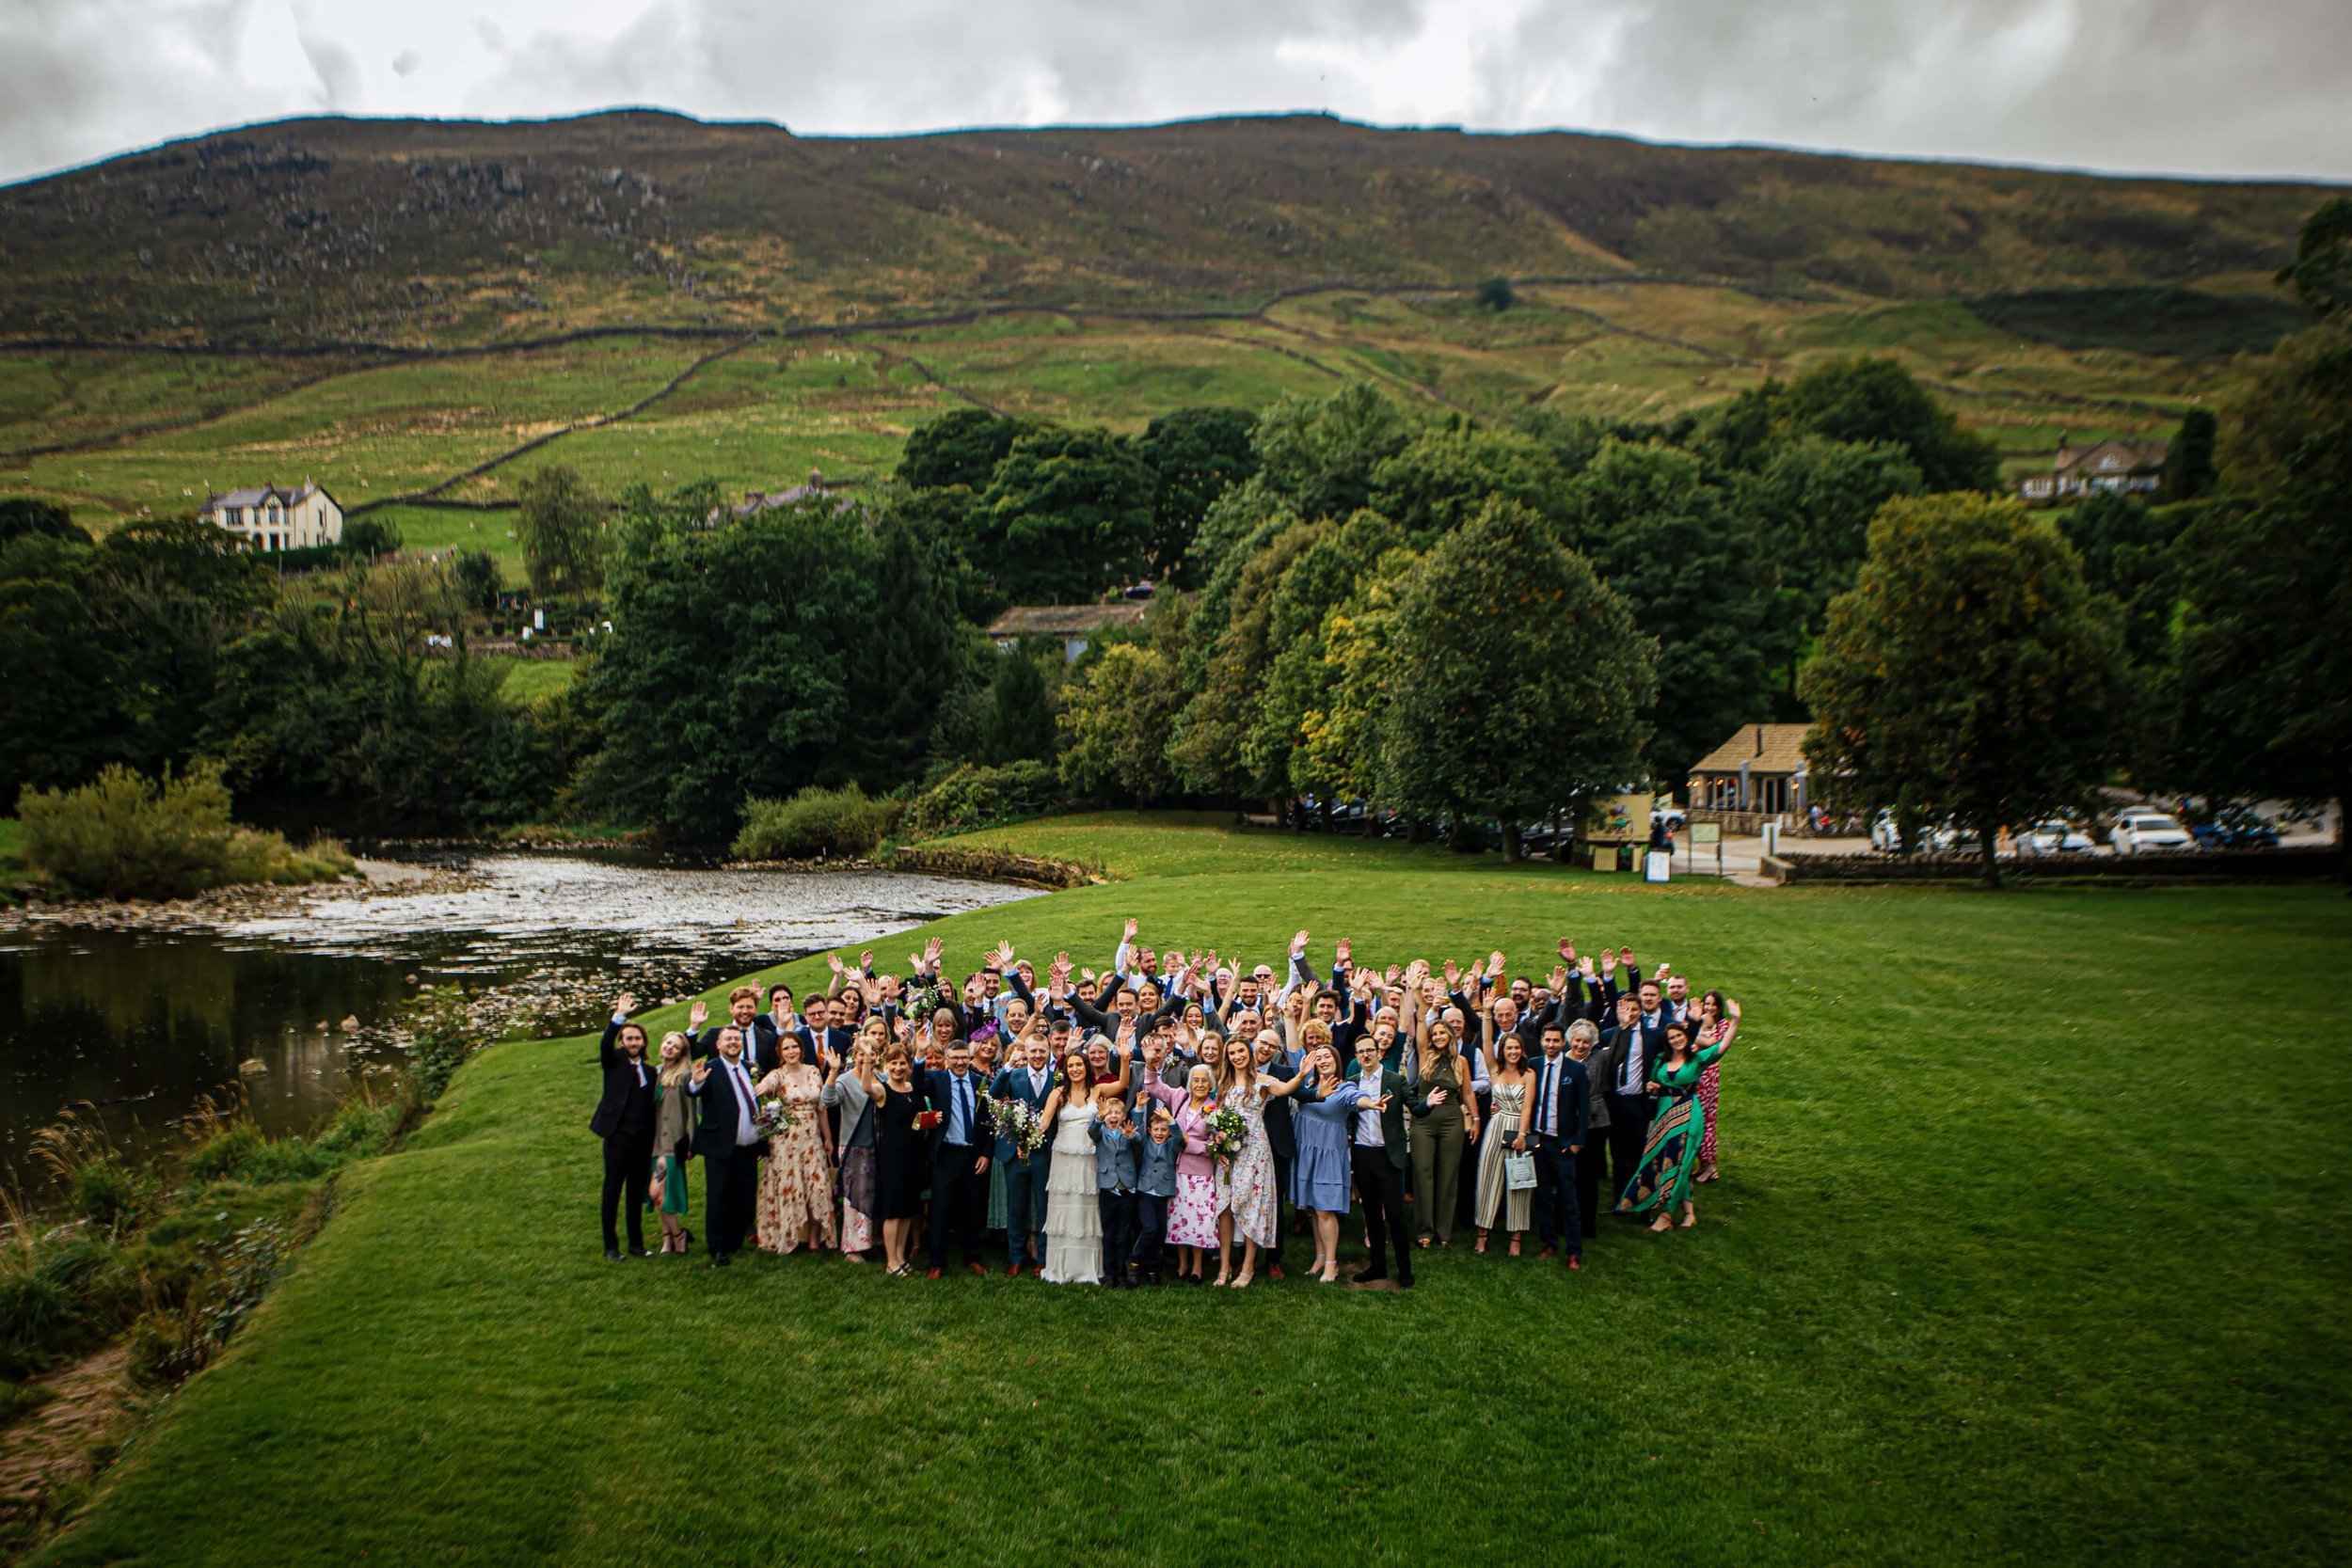 Group photo at Burnsall with the Yorkshire Dales as a backdrop